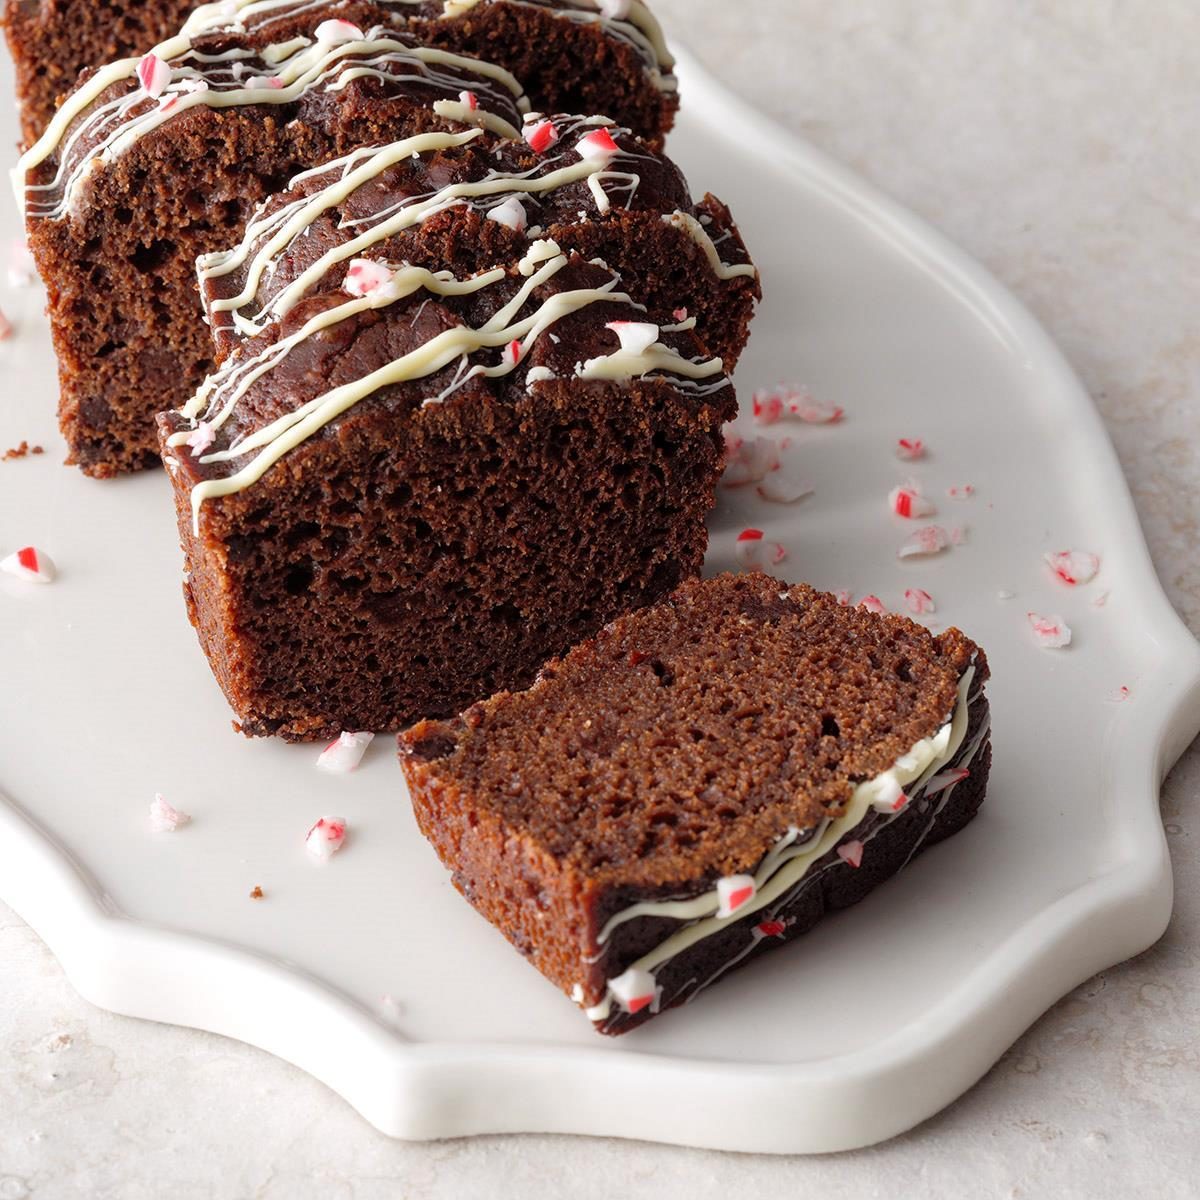 https://www.tasteofhome.com/wp-content/uploads/0001/01/Candy-Cane-Chocolate-Mini-Loaves_EXPS_THD18_233758_B08_02_3b.jpg